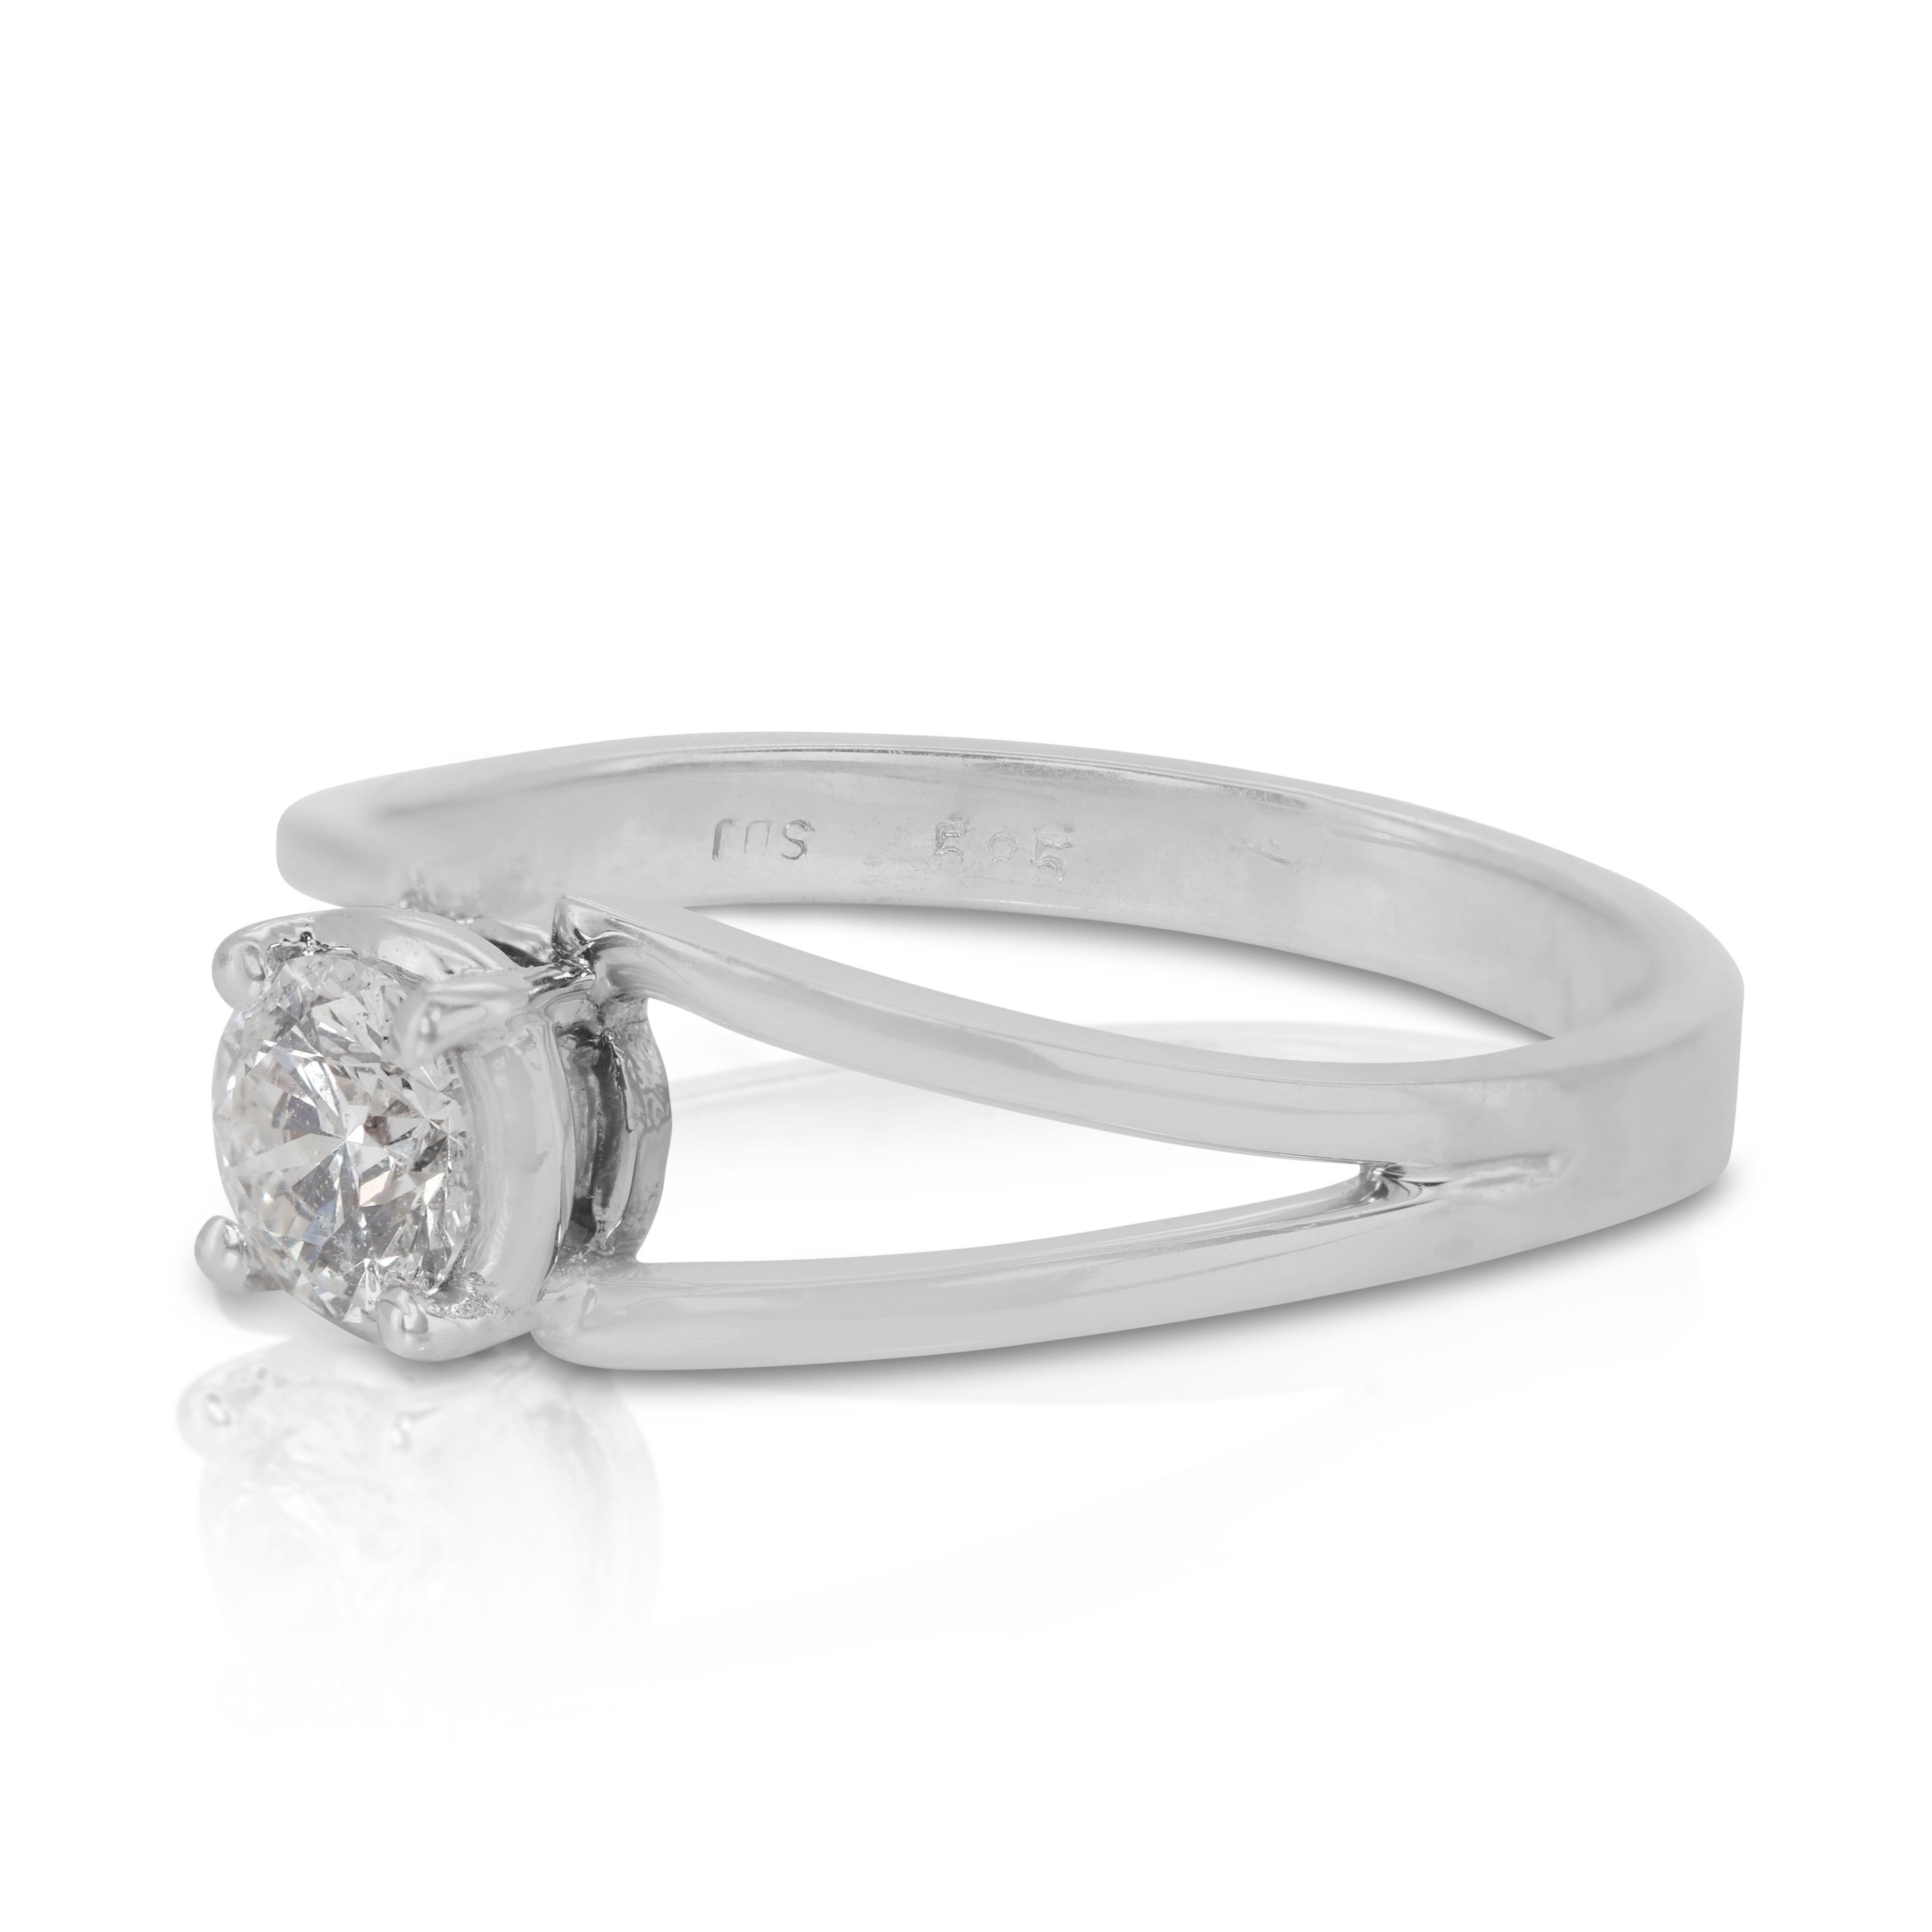 Beautiful 0.32ct Diamond Solitaire Ring set in 14K White Gold For Sale 2